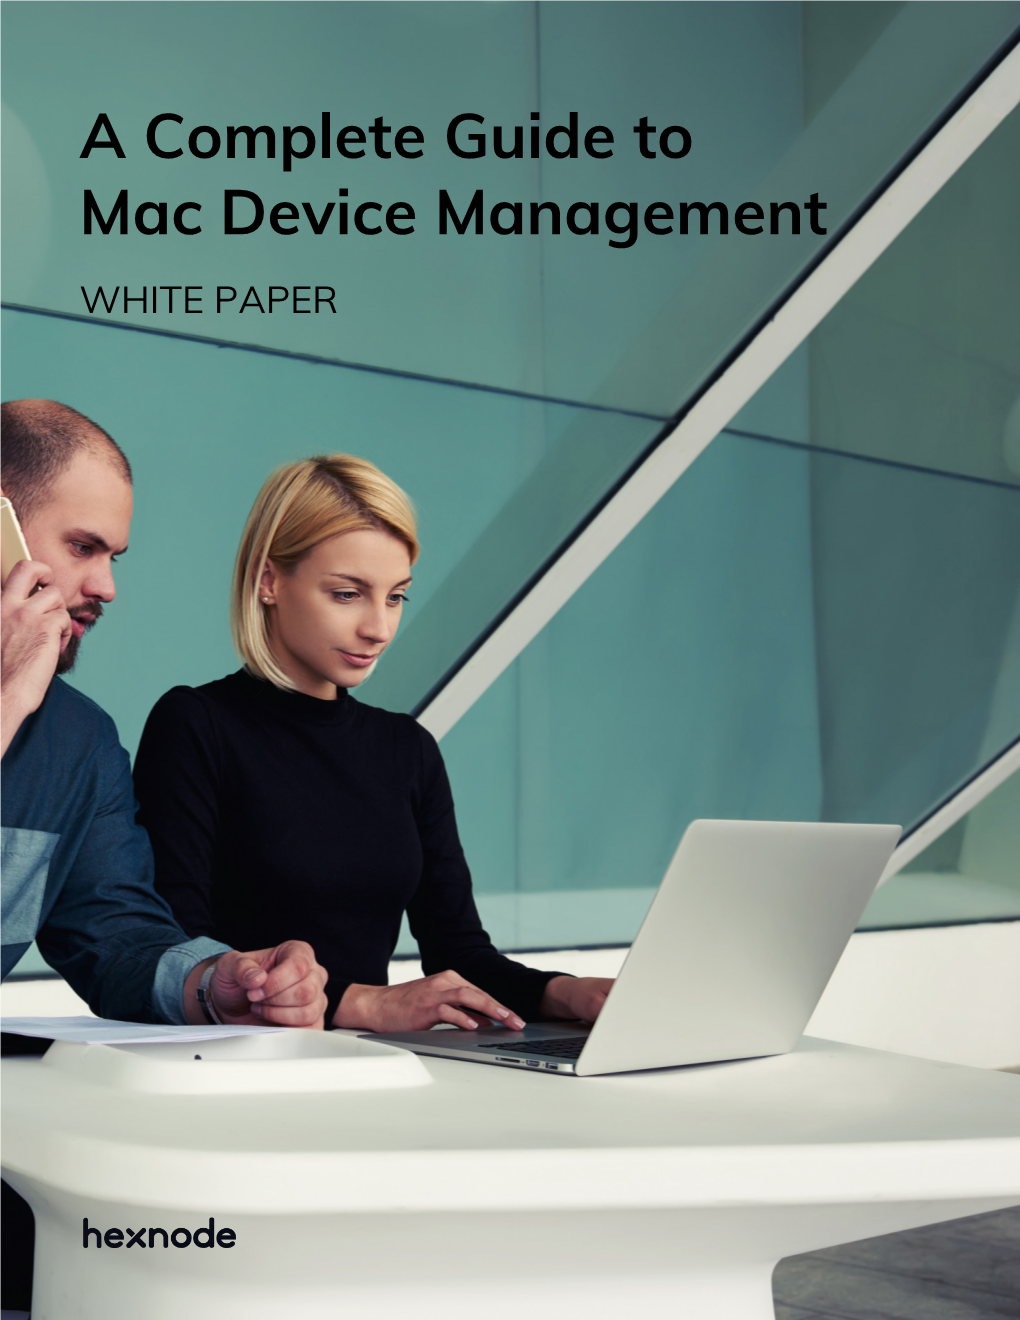 A Complete Guide to Mac Device Management